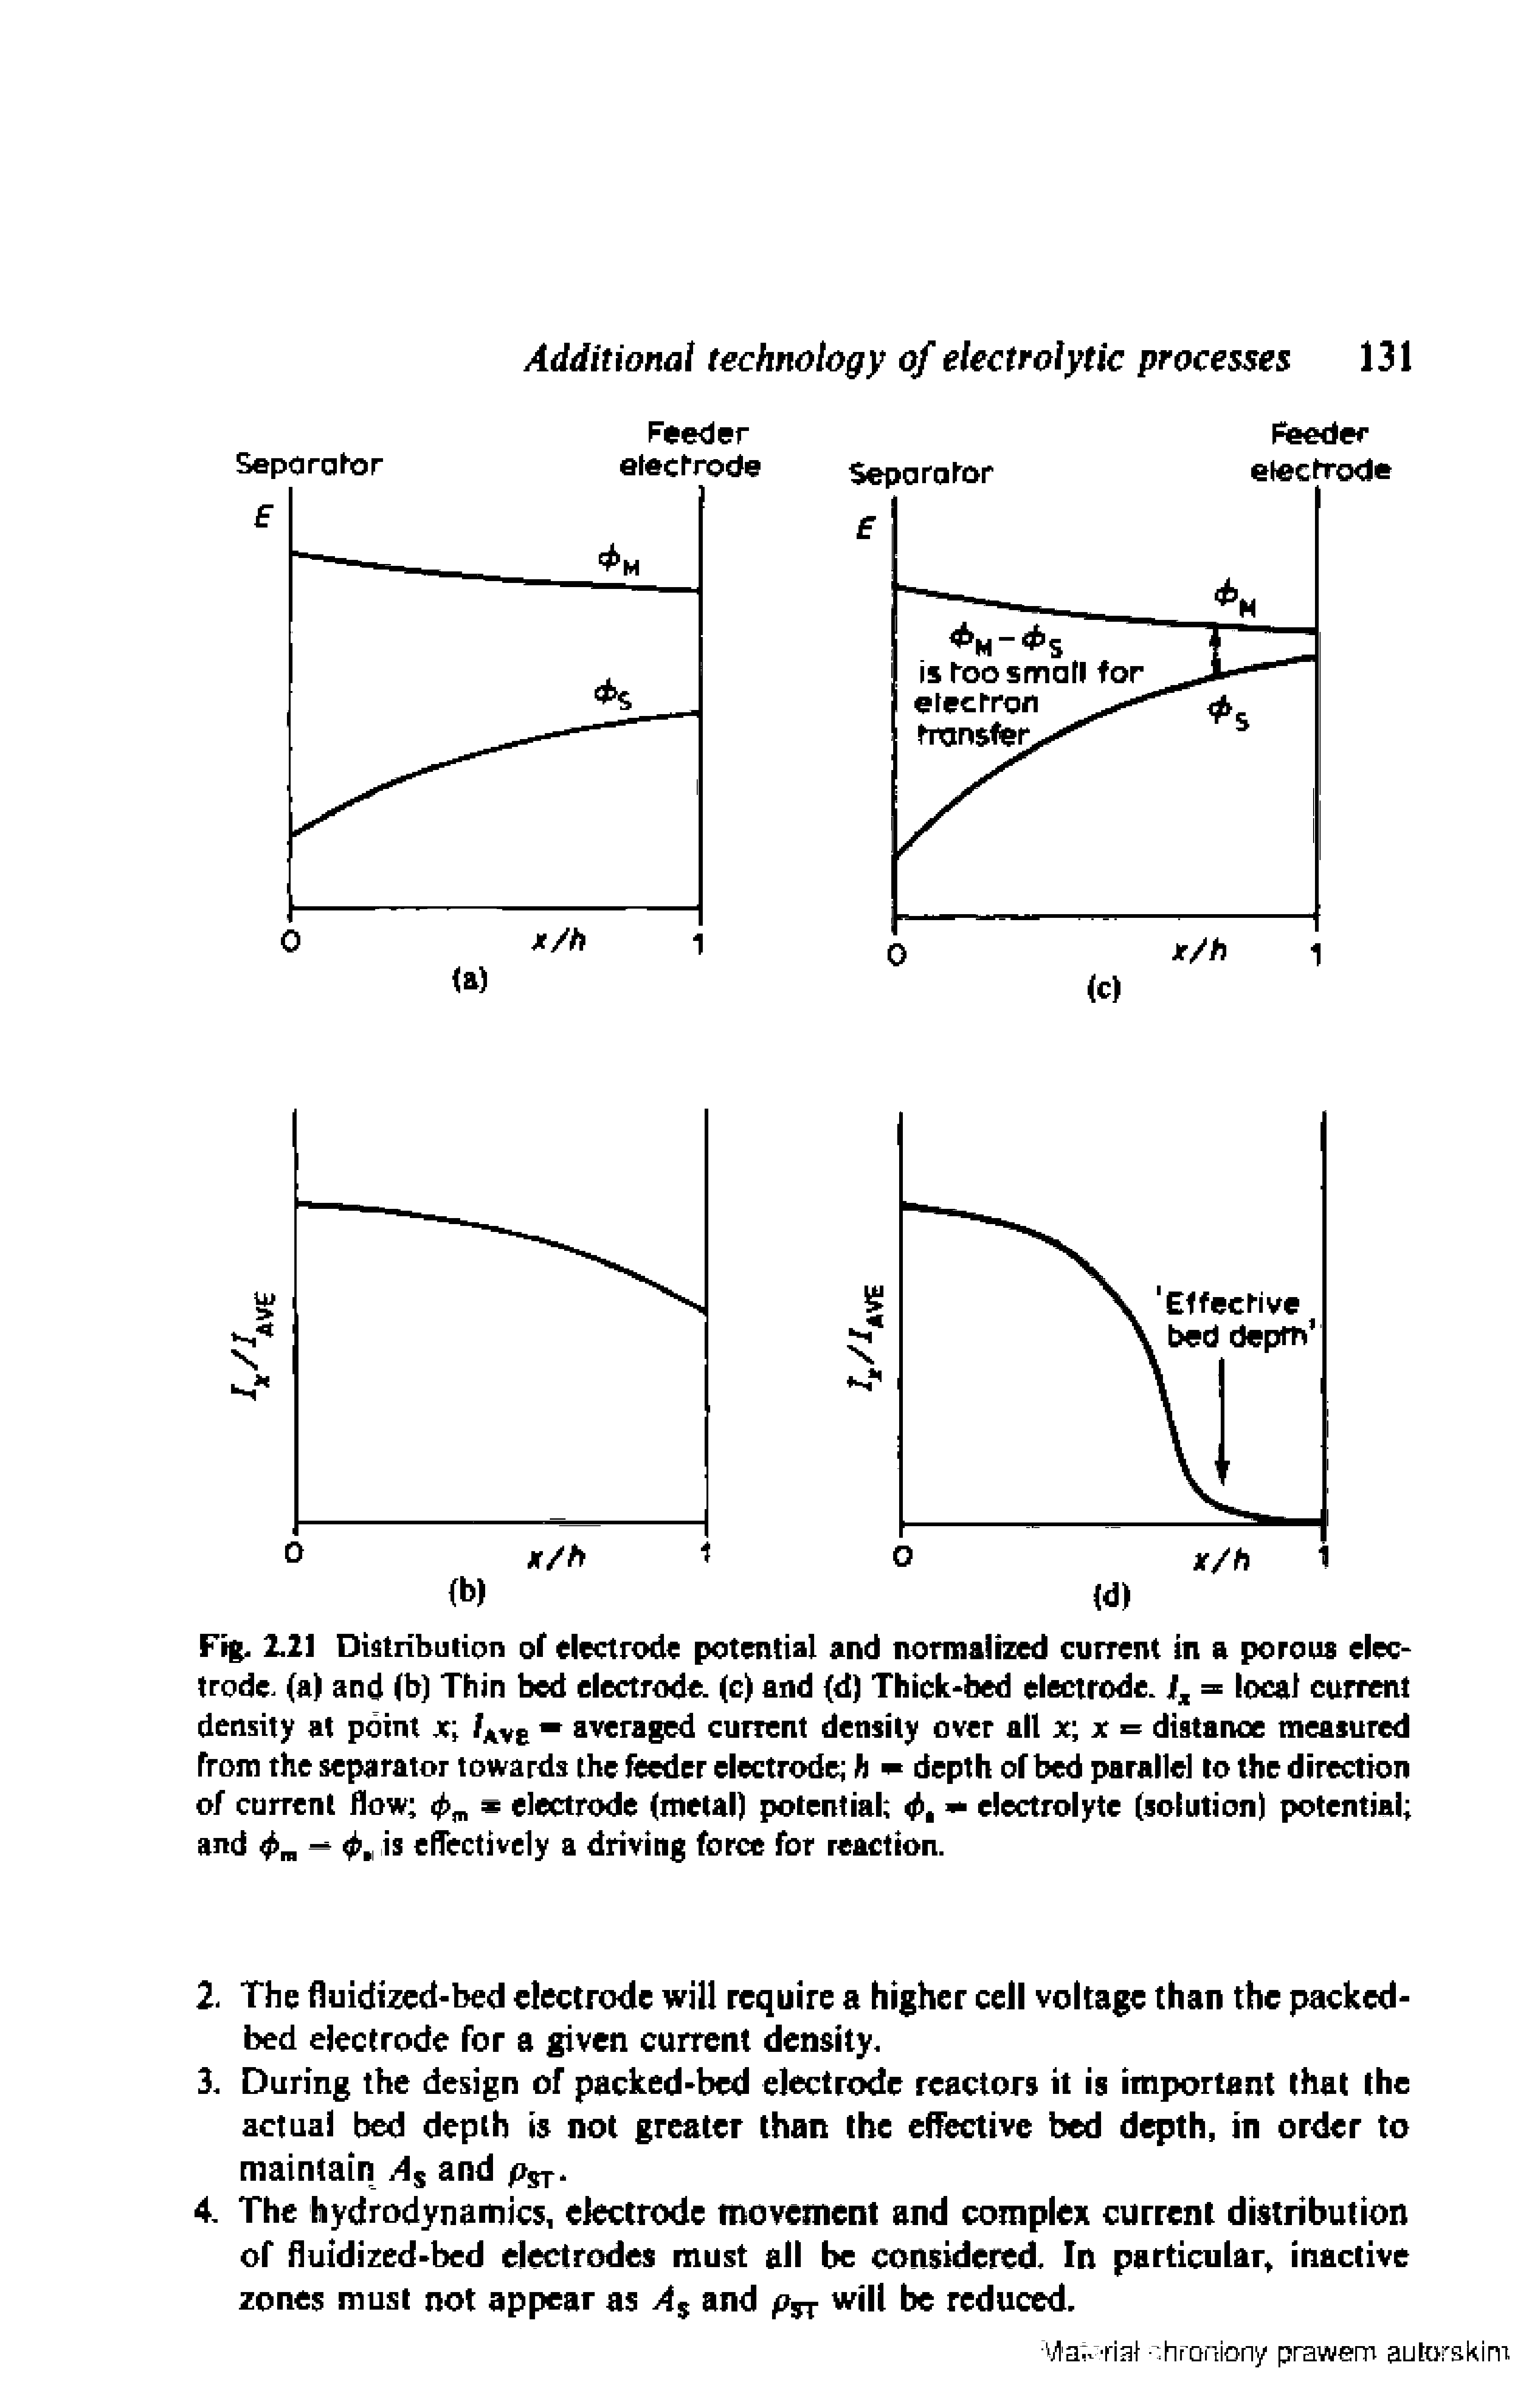 Fig. 2.2] Difitnbutipn of electrode potential and normalized current in a porous electrode. (a) and (b) Thin bed electrode, (c) and <d) Thick-bed electrode, = local current density at point x[ averaged current density over all x, x = distance measured from the separator towards the feeder electrode h depth of bed parallel to the direction of current flow electrode (metal) potential electrolyte (solution) potential and is effectively a driving force for reaction.